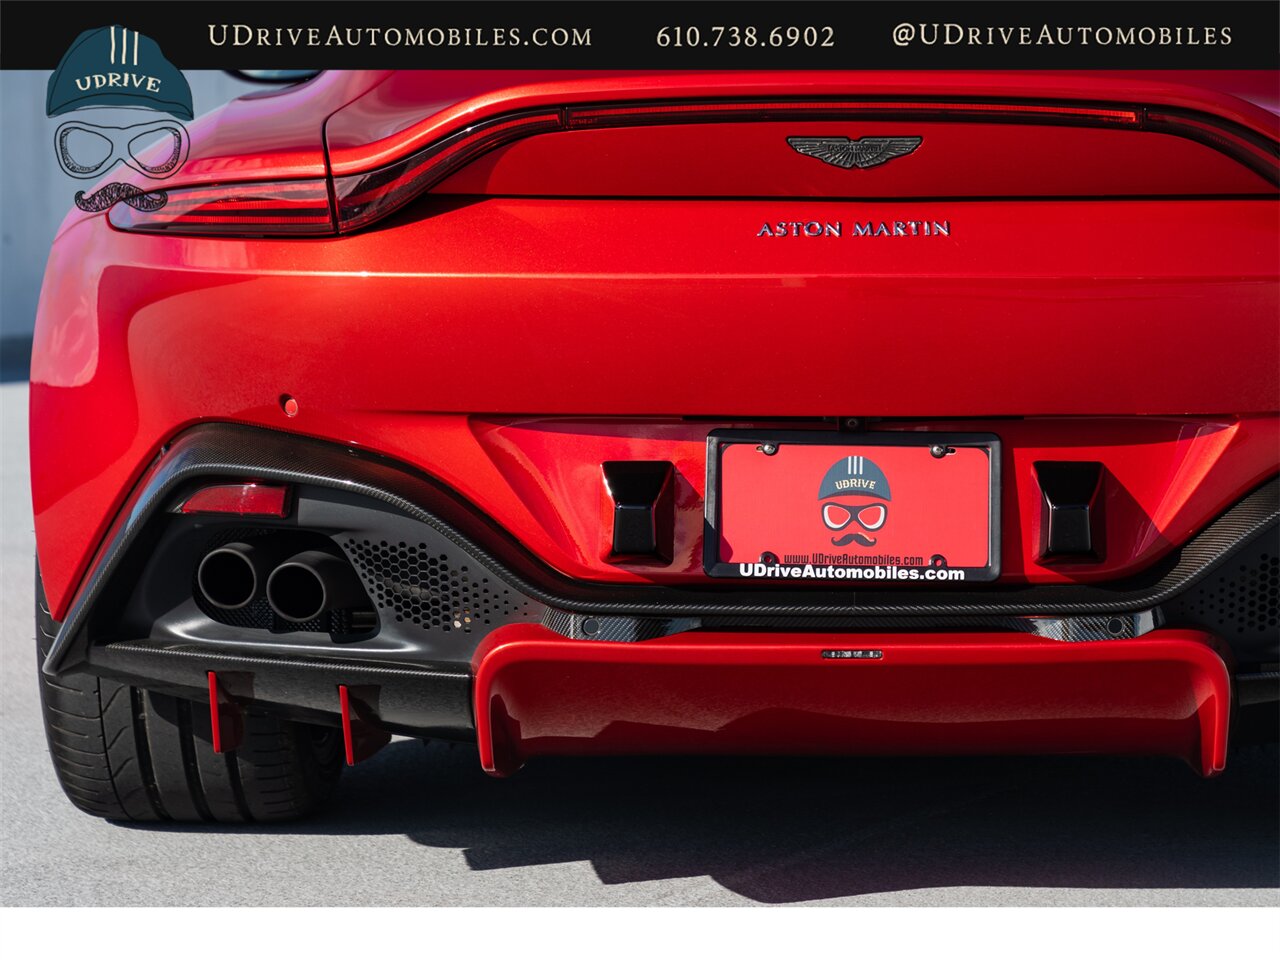 2019 Aston Martin Vantage  Incredibly Spec Rare Q Exclusive Fiamma Red $222k MSRP 1 of a Kind CPO - Photo 26 - West Chester, PA 19382